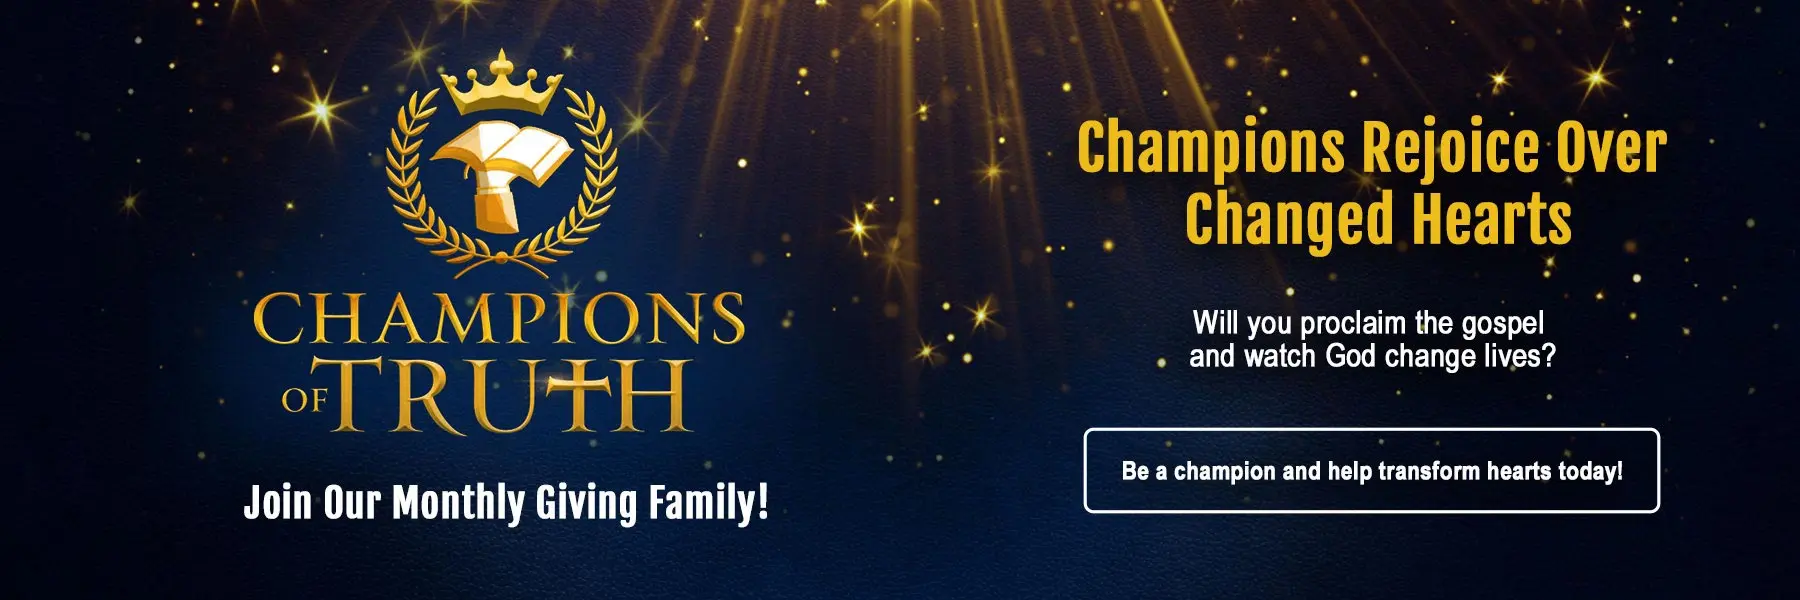 Champions of Truth logo with text to encourage to become a Champion